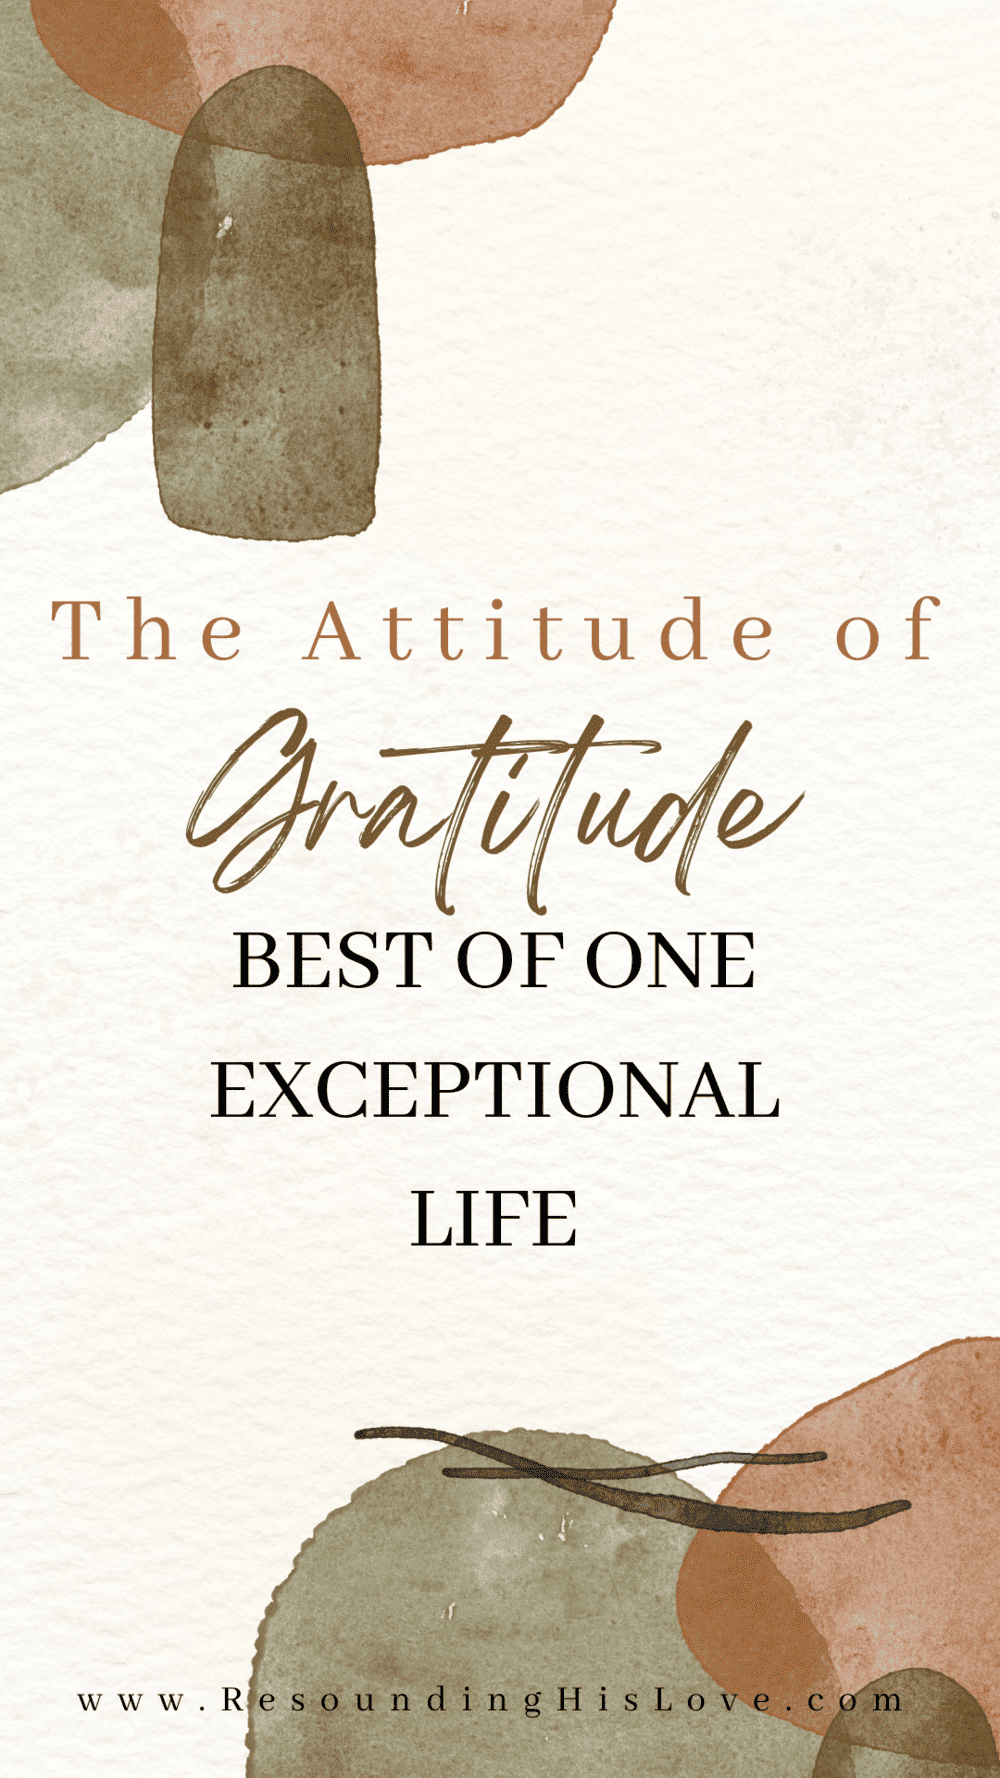 An attitude of Gratitude Best of One Exceptional Life